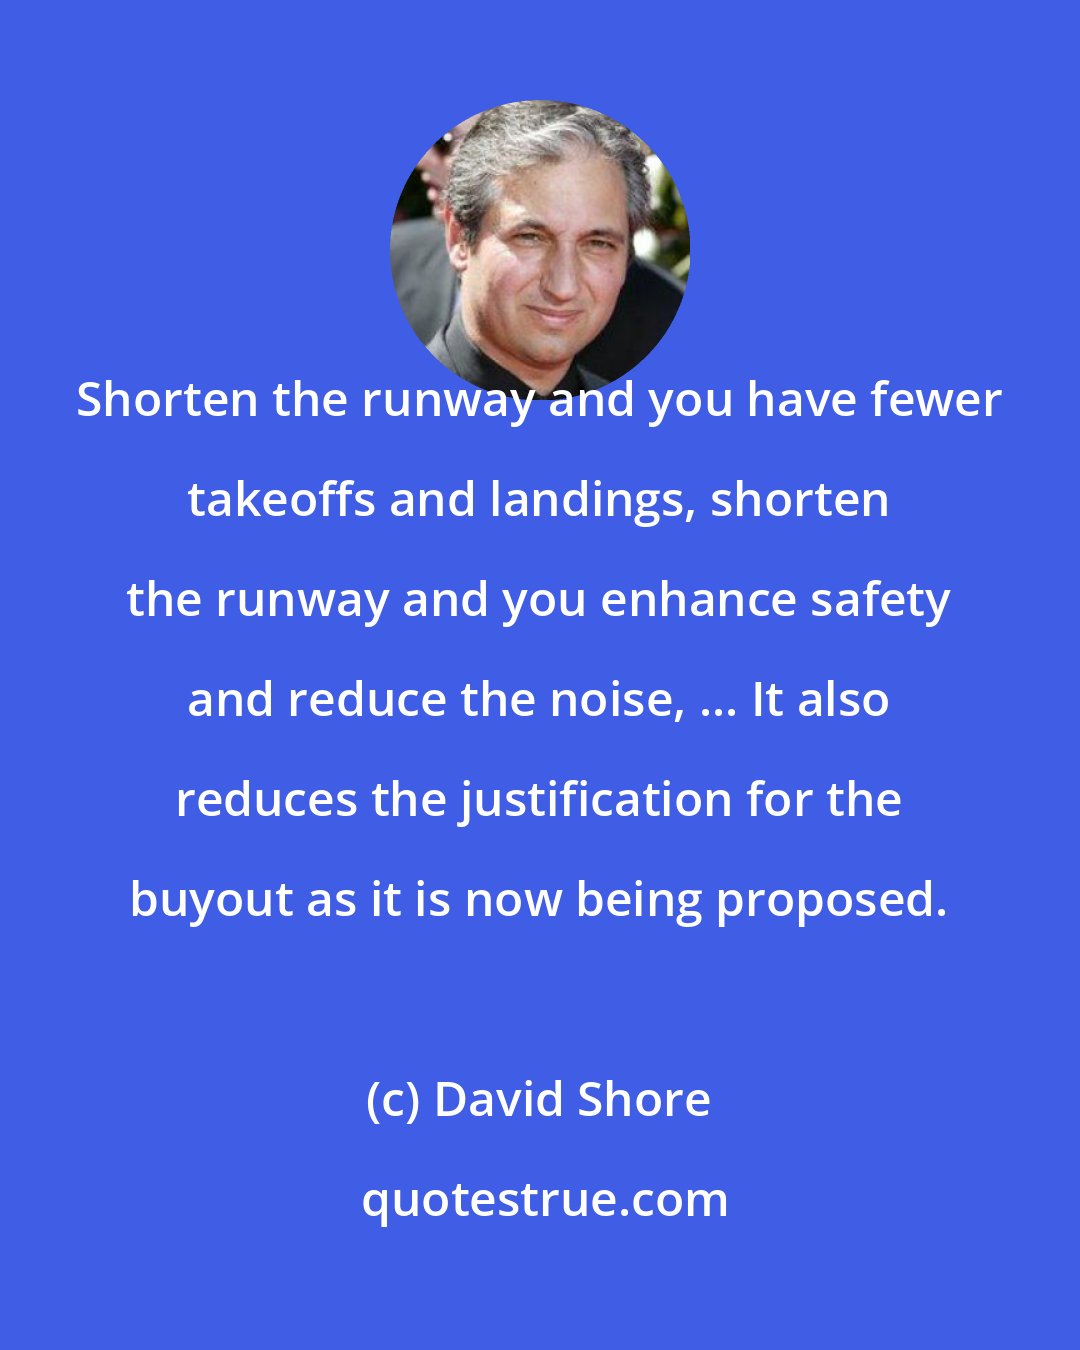 David Shore: Shorten the runway and you have fewer takeoffs and landings, shorten the runway and you enhance safety and reduce the noise, ... It also reduces the justification for the buyout as it is now being proposed.